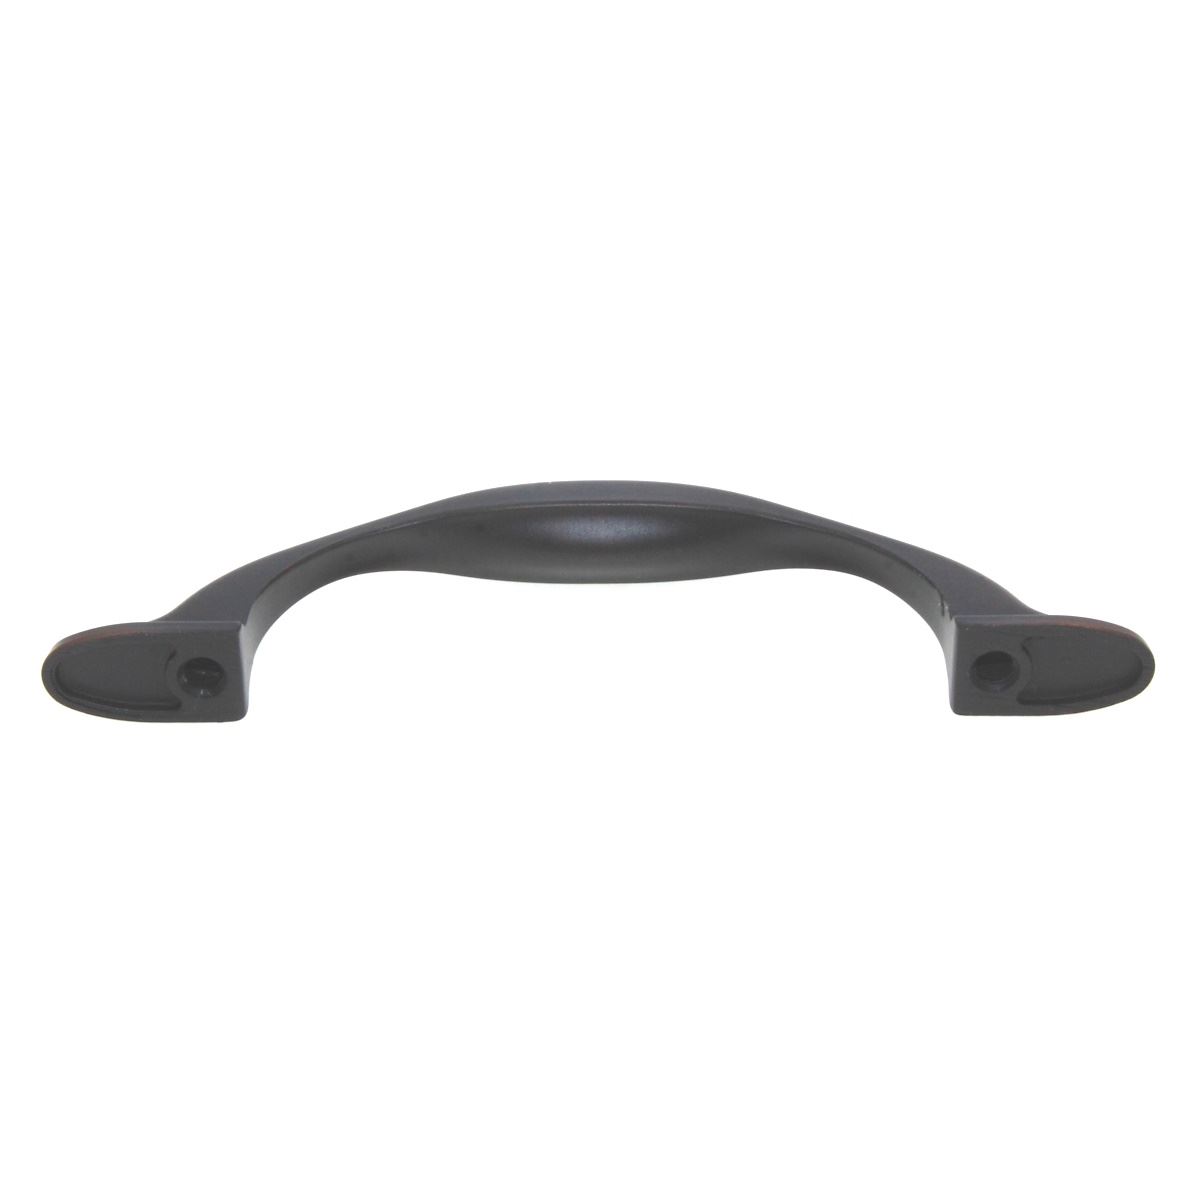 Amerock Atherly Cabinet Arch Pull 3" Ctr Oil-Rubbed Bronze BP29289ORB